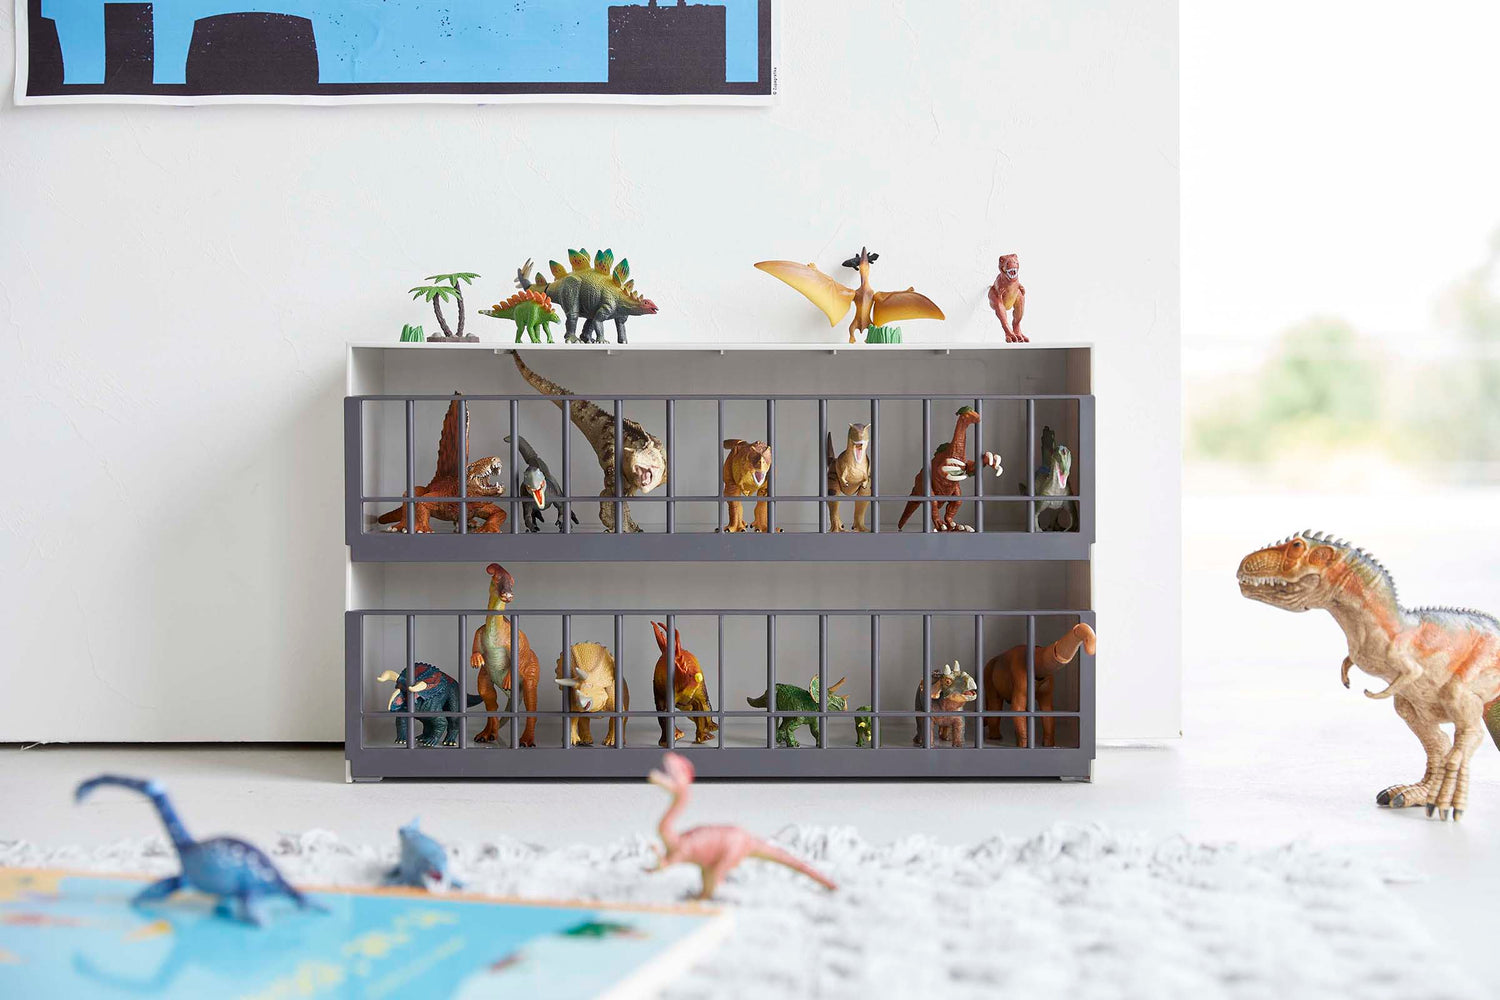 View 4 - Front view of white Two-Tier Toy Dinosaur and Animal Storage Rack in living room play area holding toy dinosaurs by Yamazaki Home.